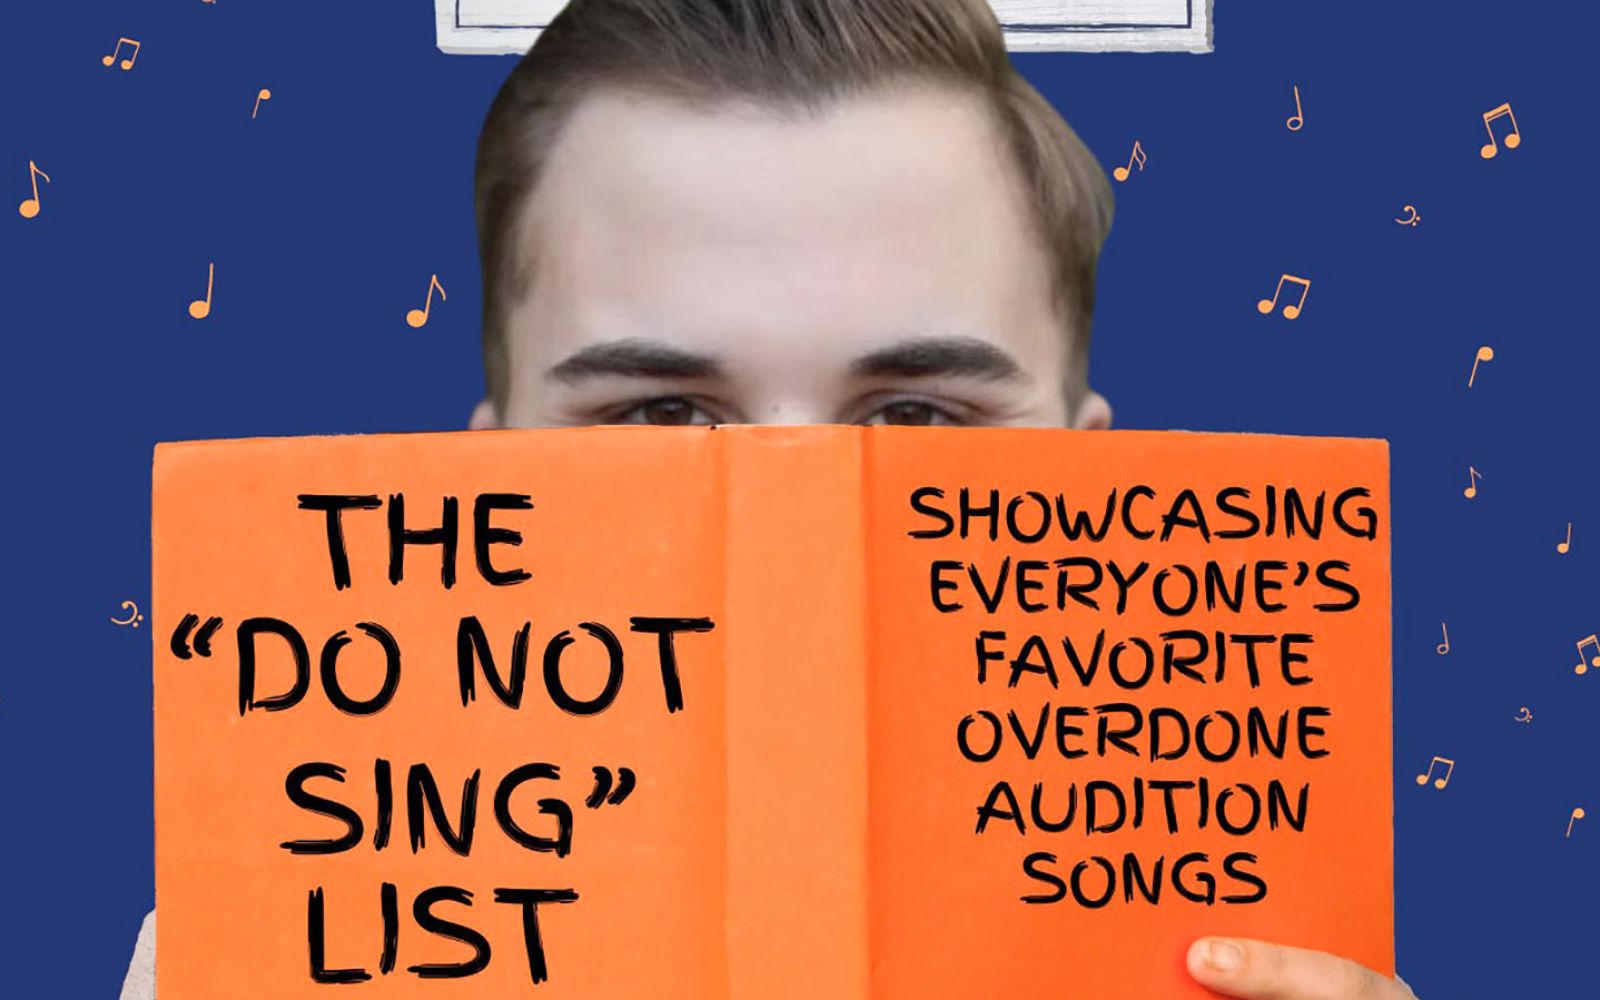 Indiana Musical Theatre Foundation's "The 'Do Not Sing' List" will be put on June 14-15 at RKF Studios.